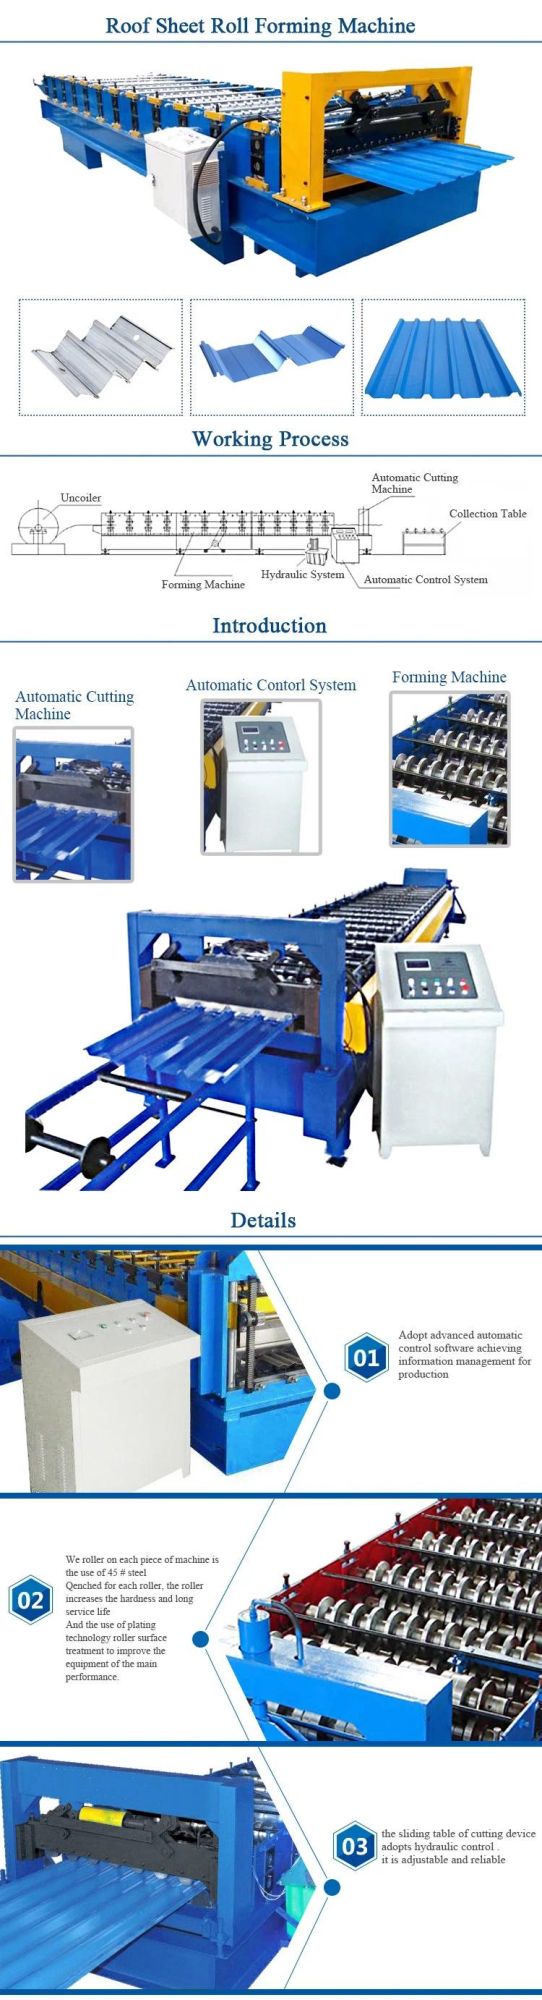 High Accuracy Line Roof Panel Tile Cold Roll/Rolling Formed/Forming Machine